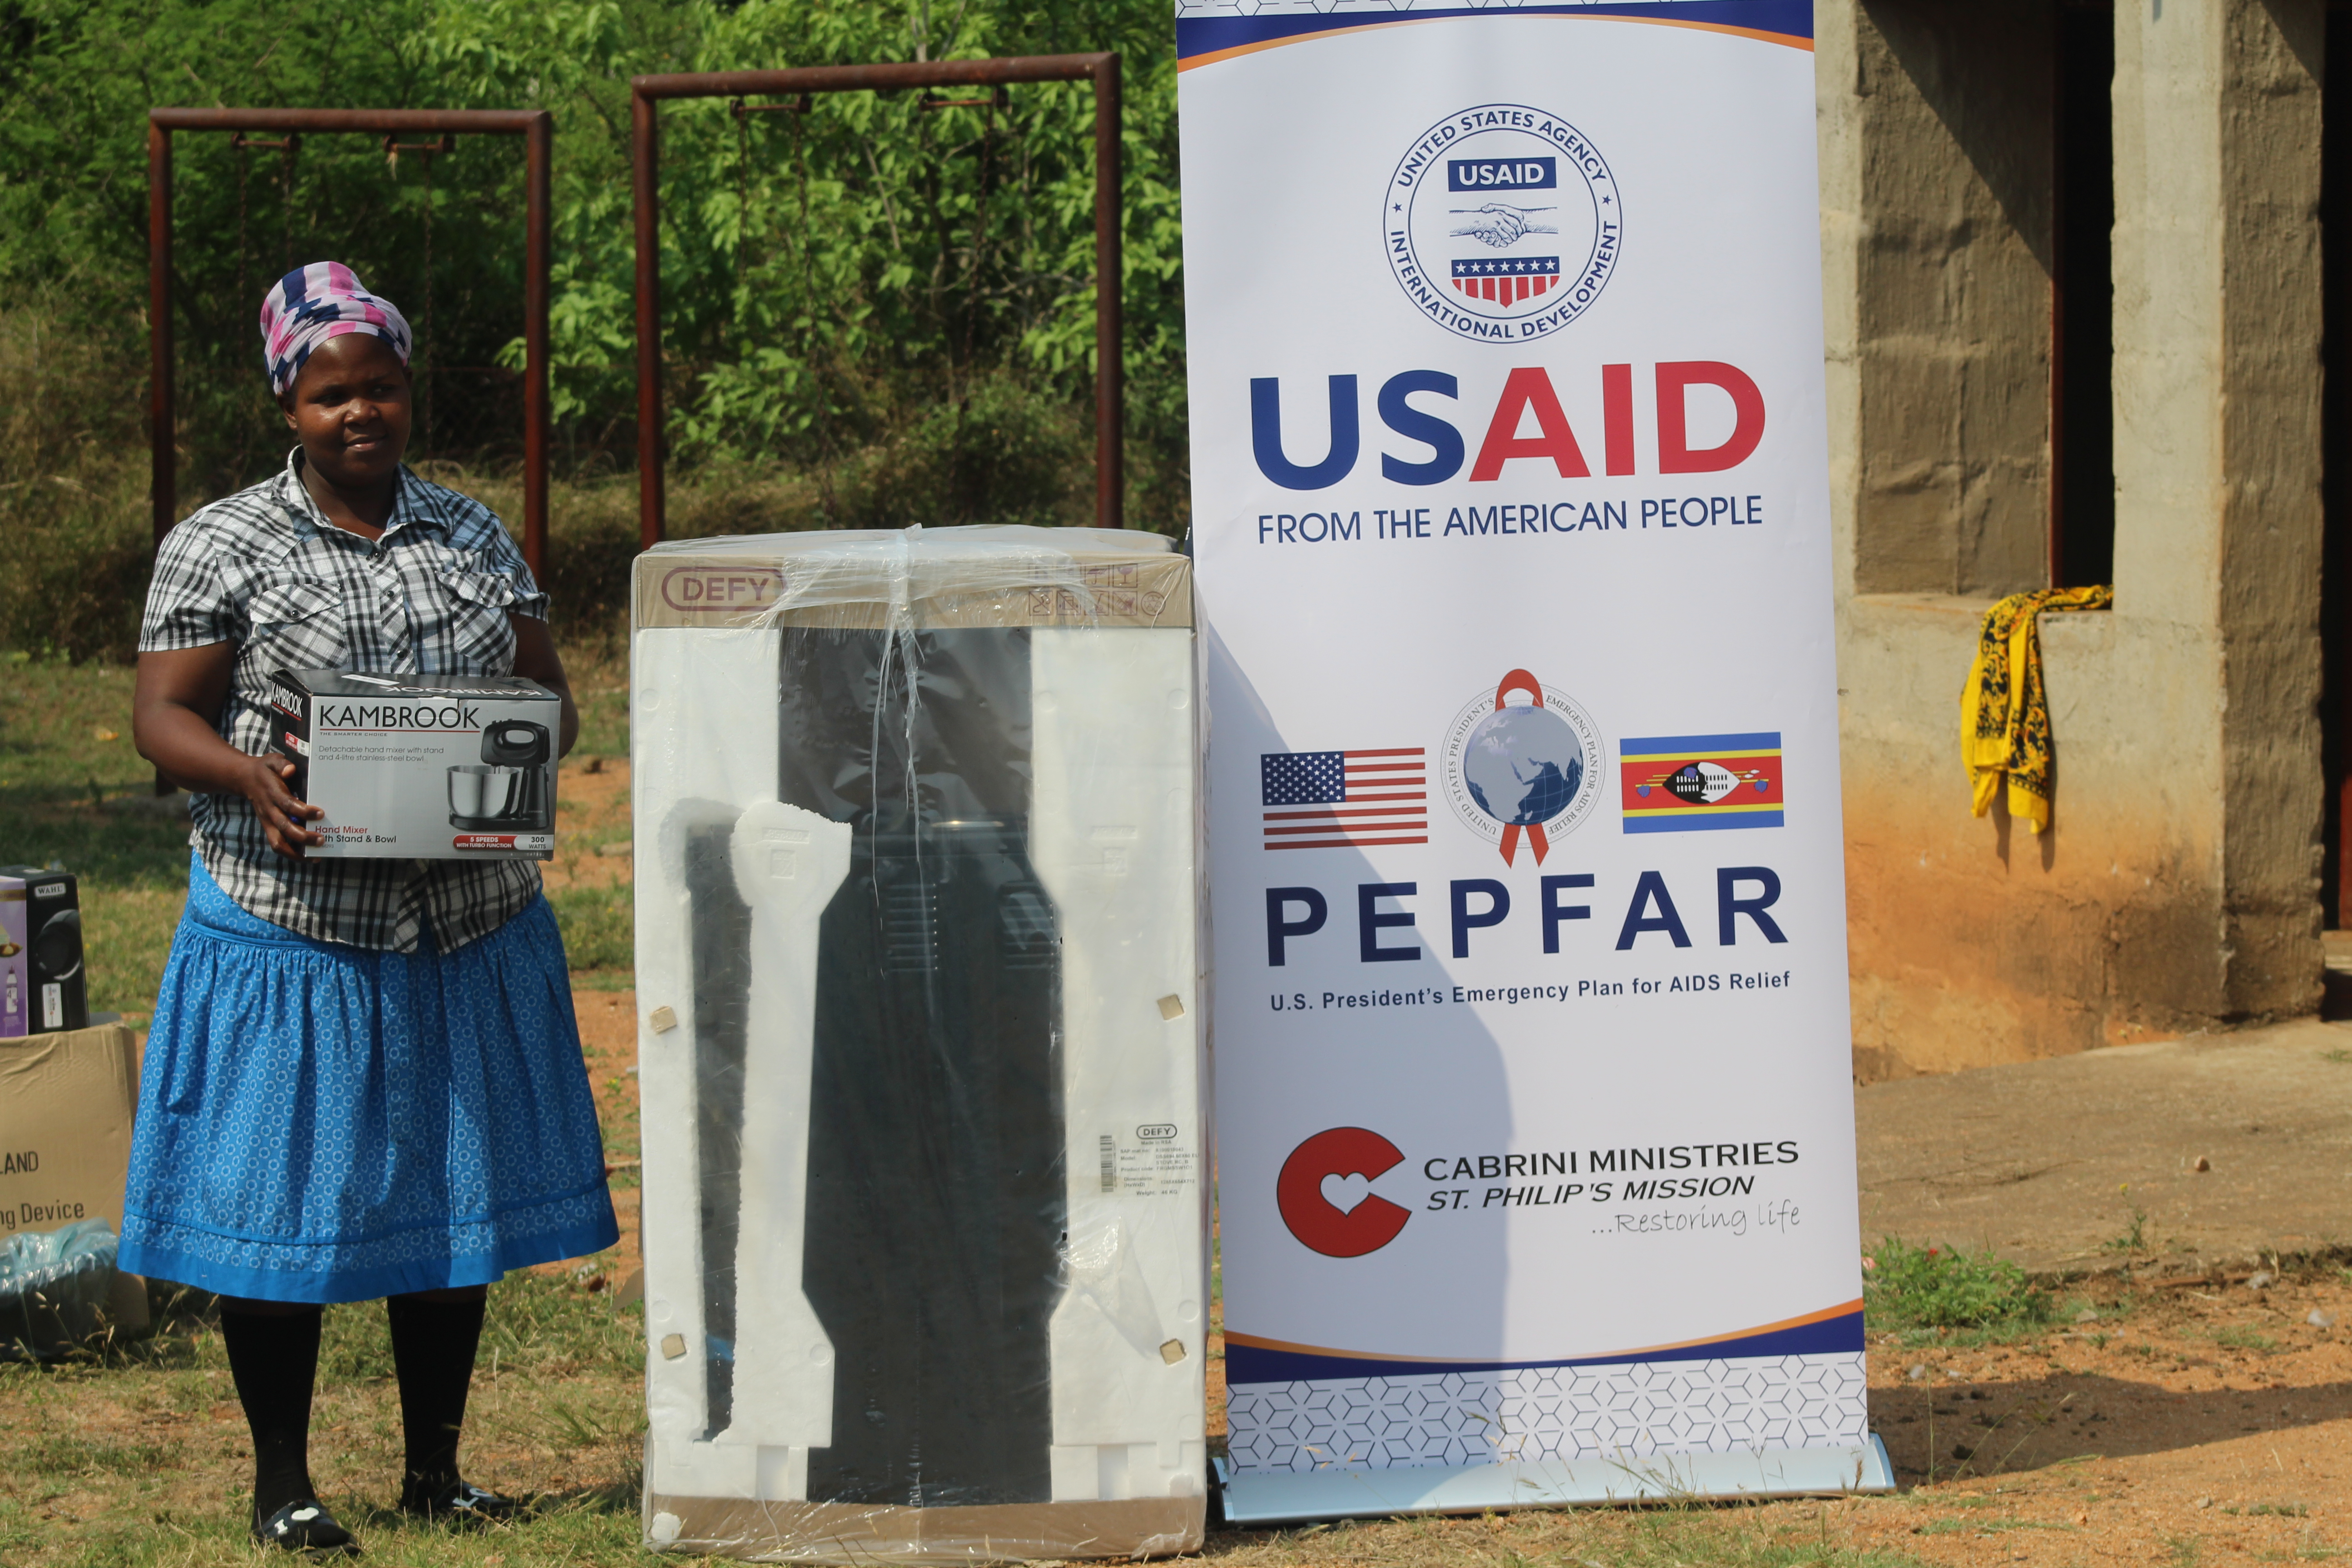 Ncobile receives the equipment needed to start her own small businesses through USAID support.